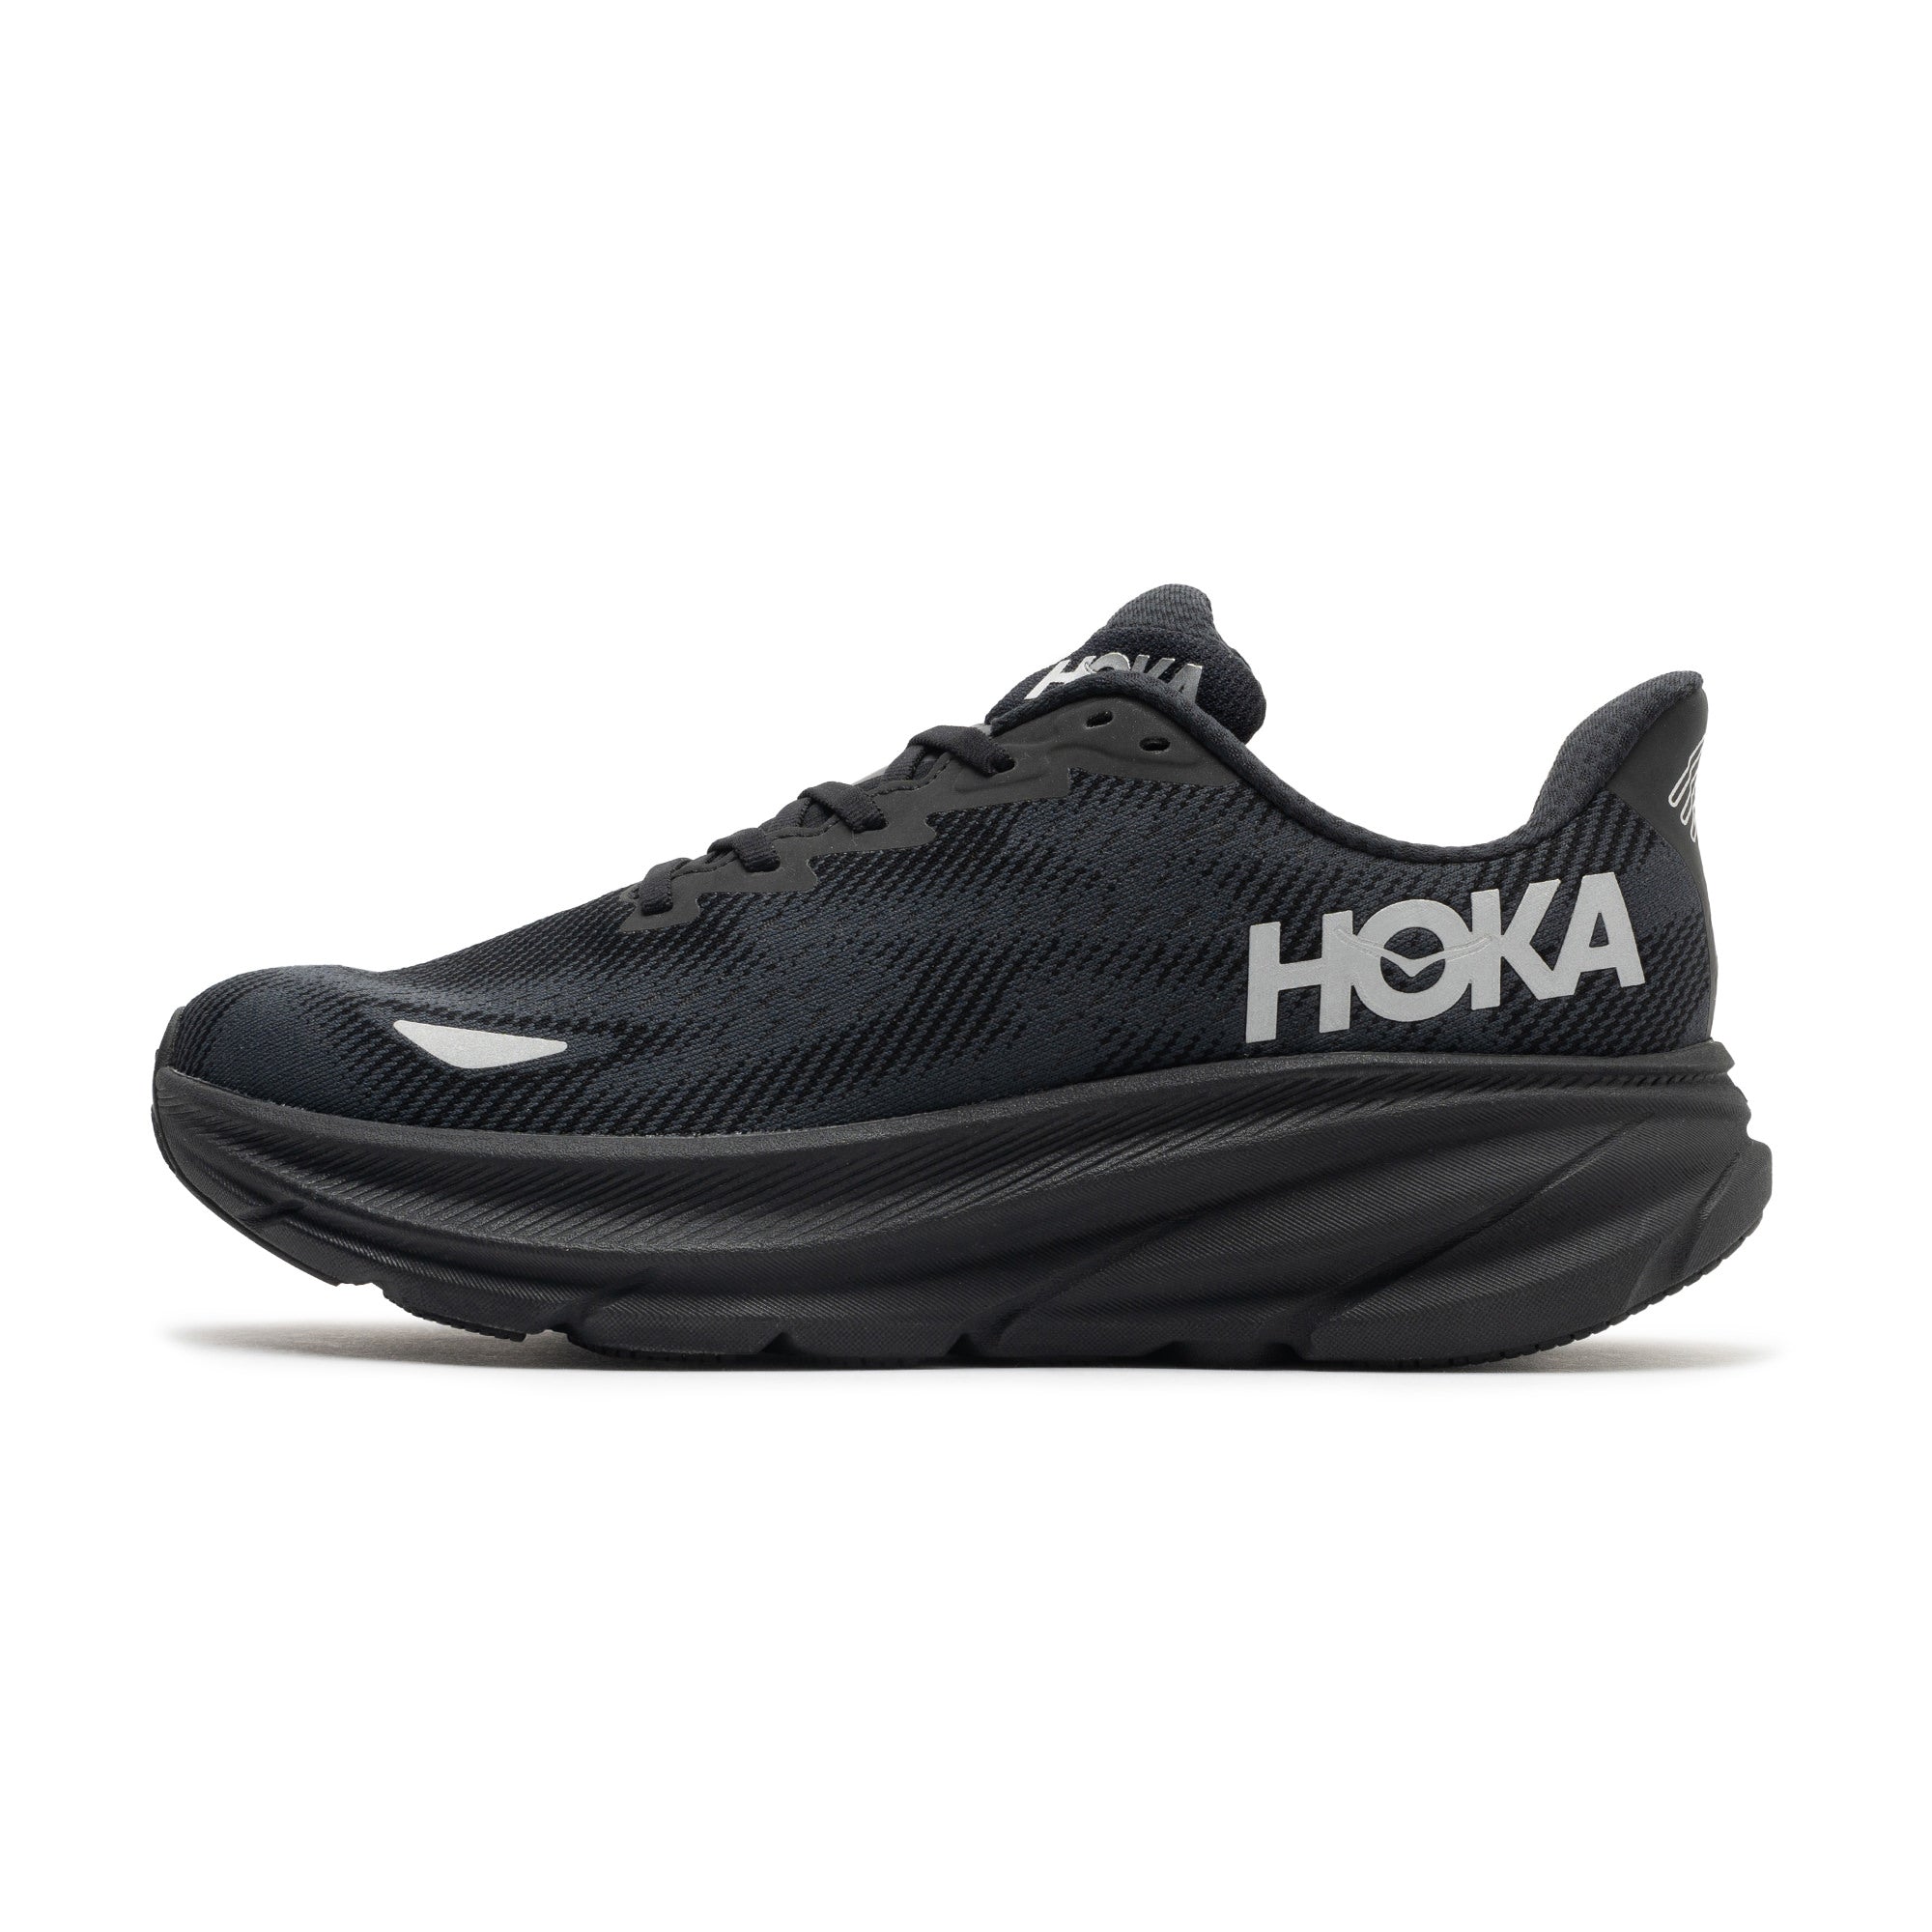 hoka shoes / rit dyemore and Wildfang coveralls / original rit : r